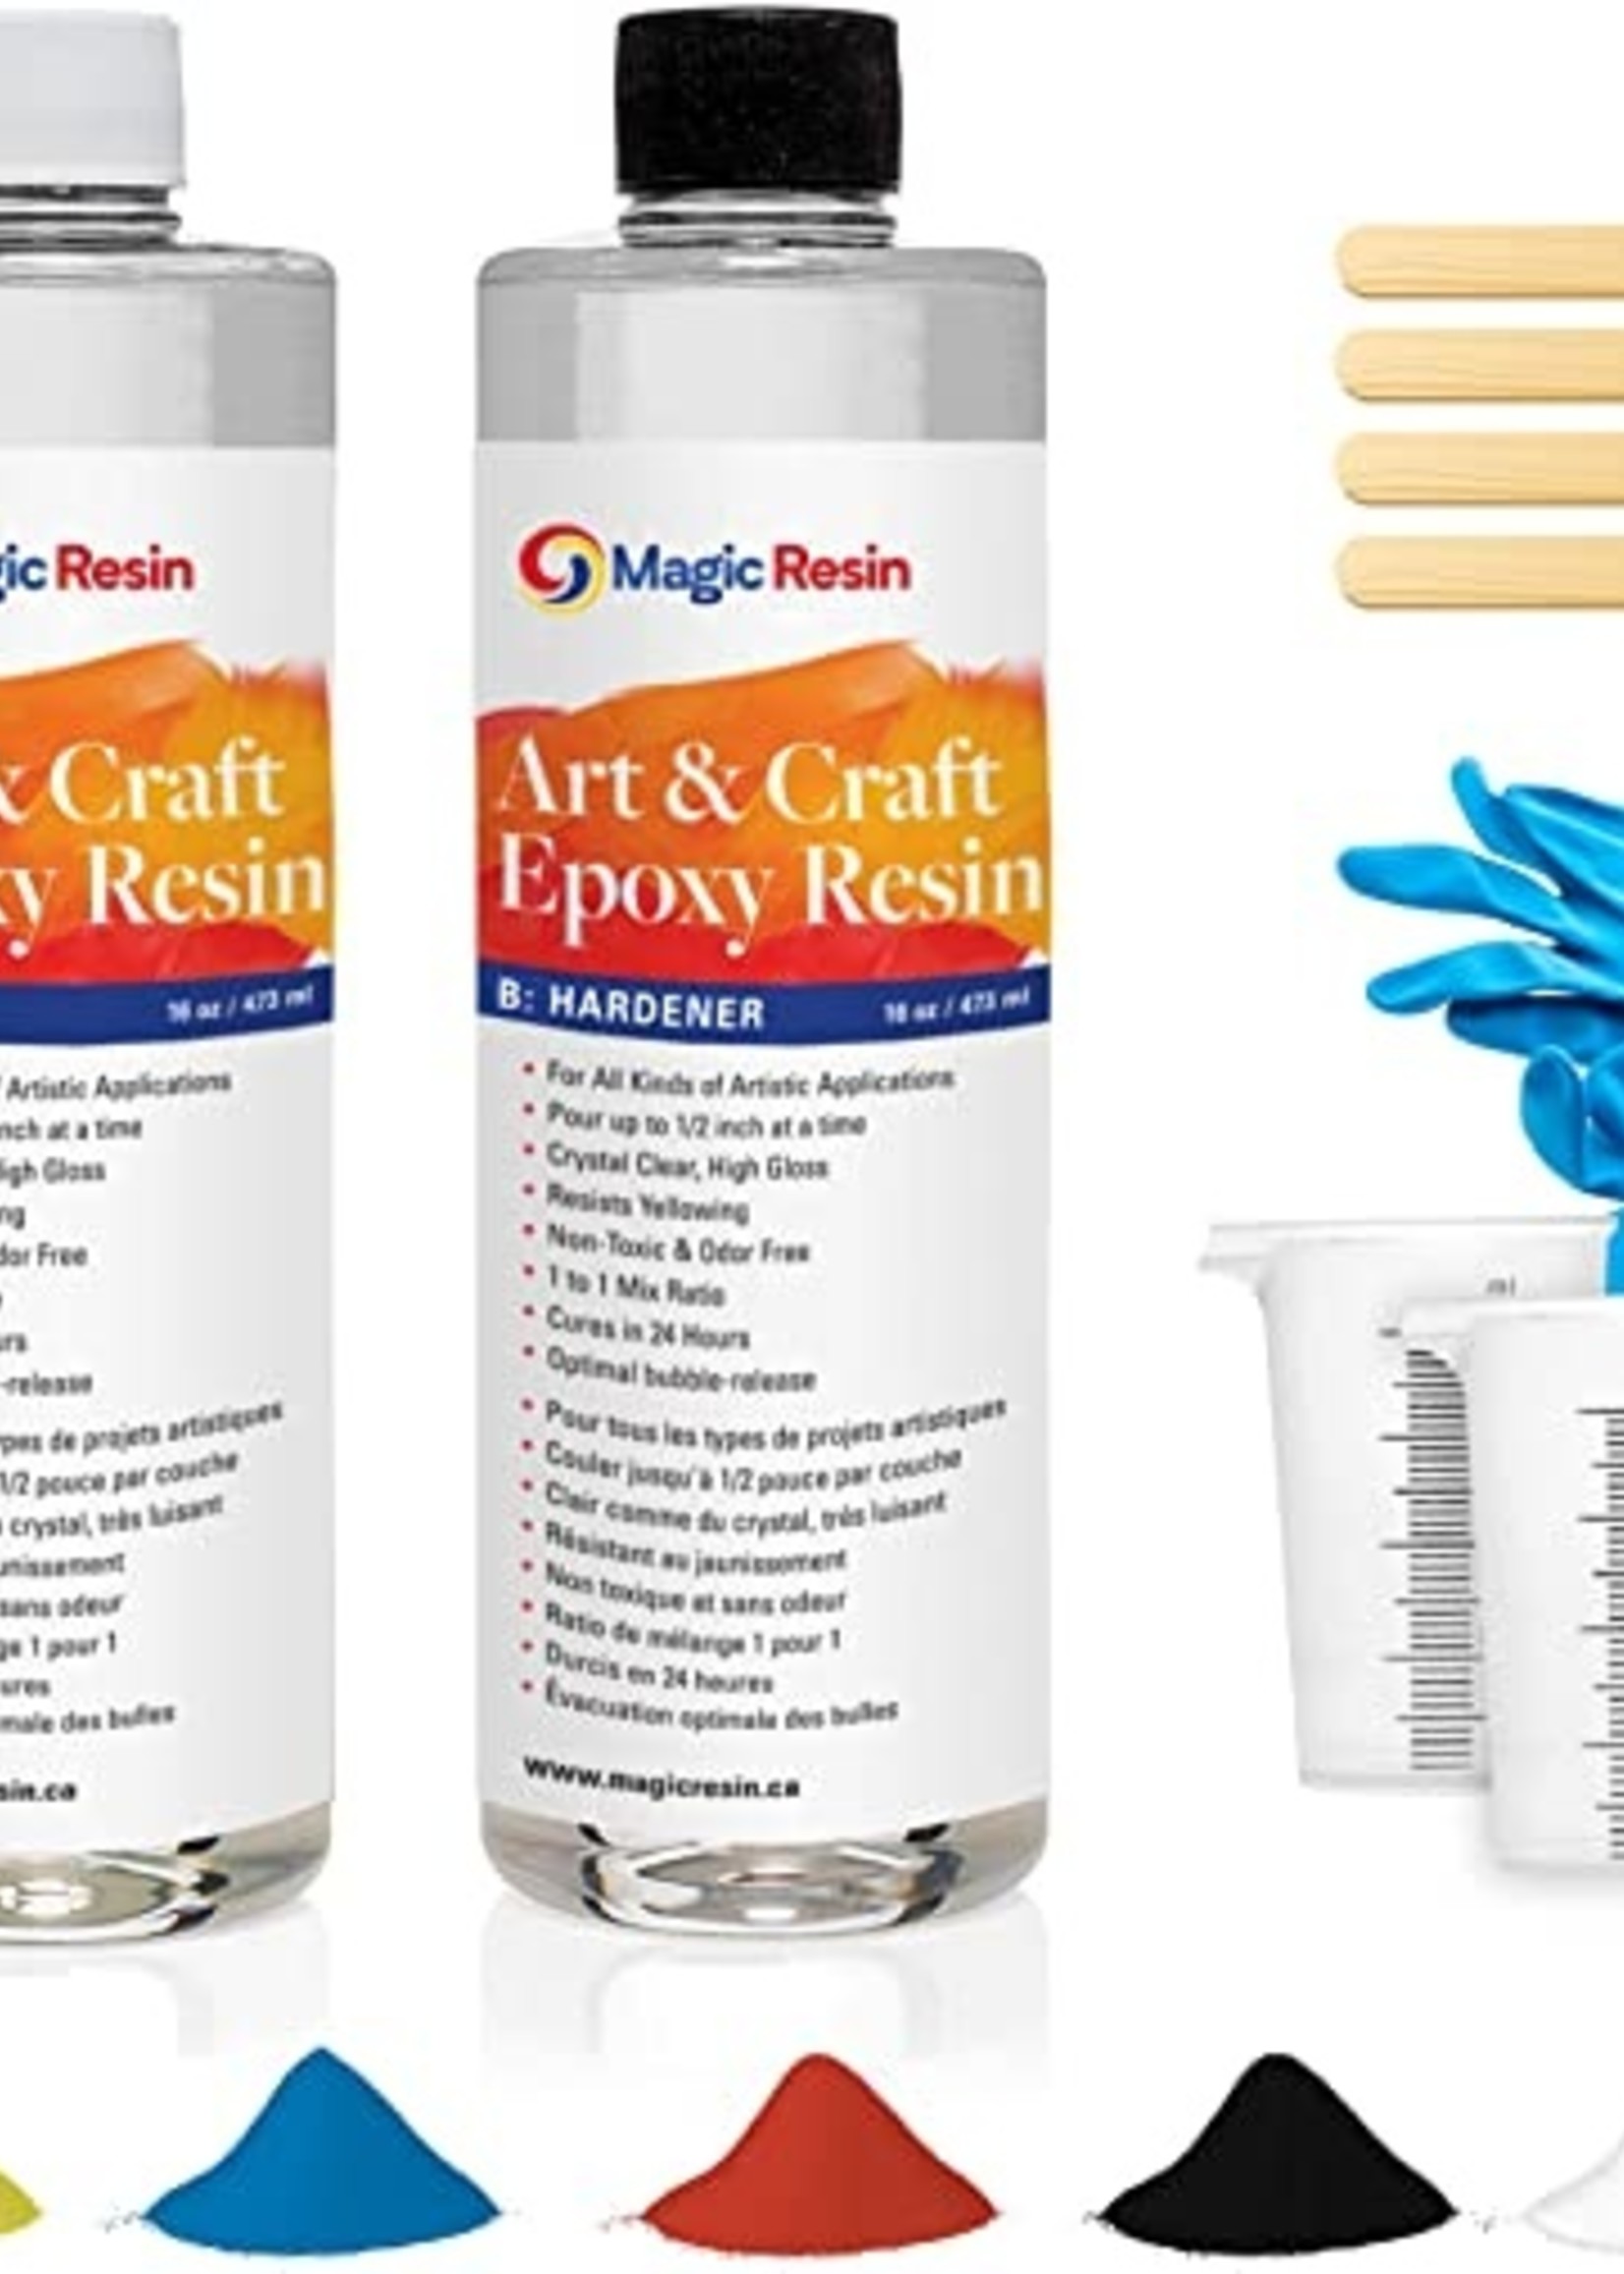 Magic Resin 32 Oz (946 ml)  Art & Craft Epoxy Resin Kit  Includes 3 pairs of gloves, 2 cups, 4 sticks & 5 x 5g mica powder bags